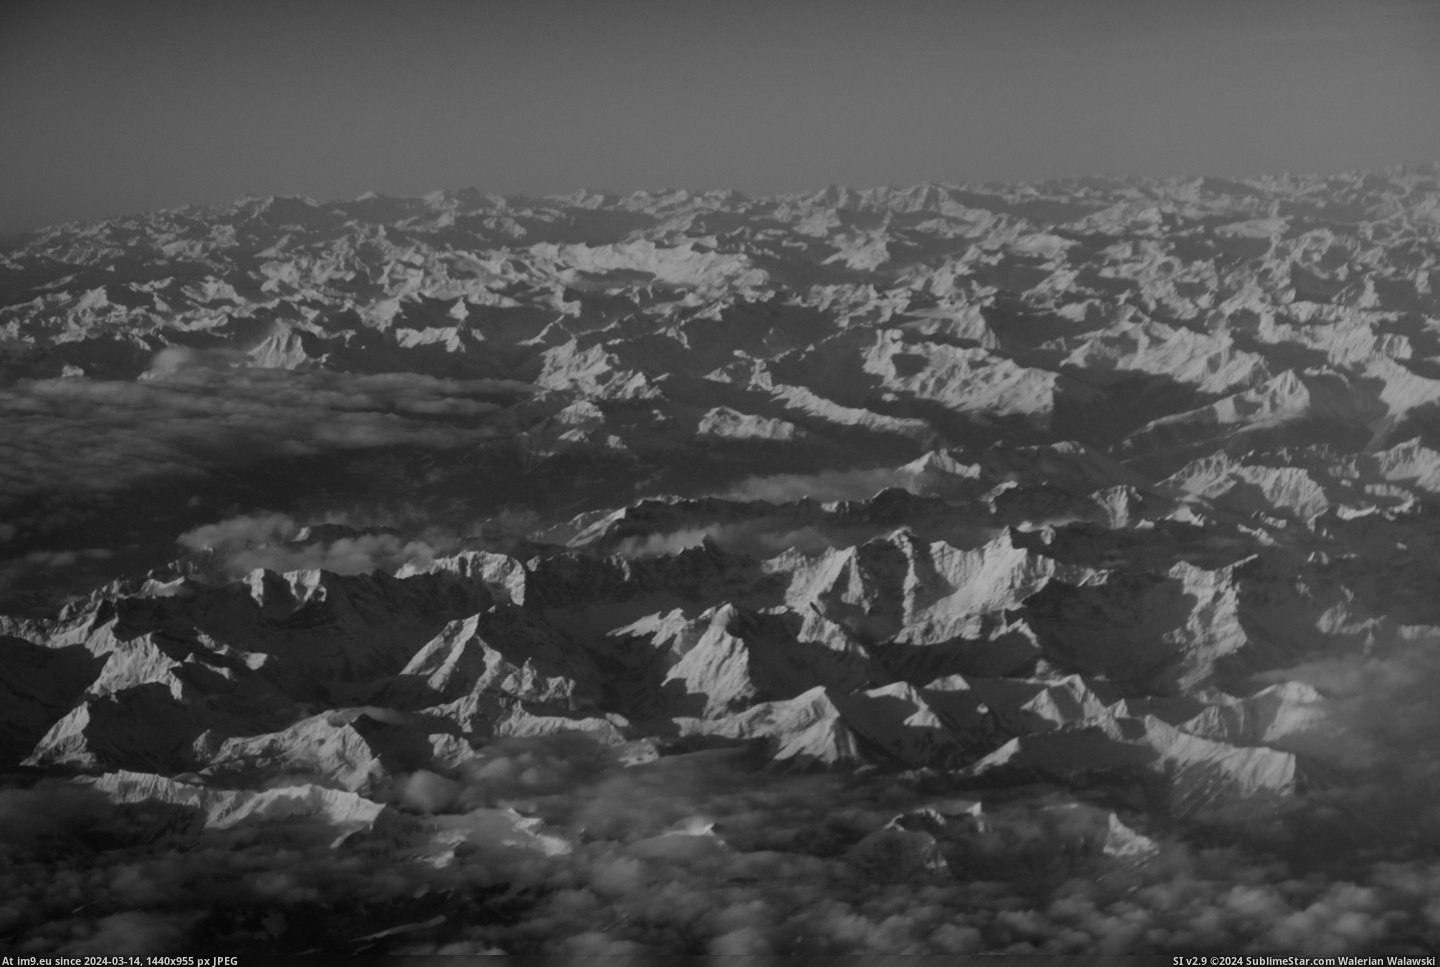 #Week #Airplane #Swiss #Alps [Earthporn] The Swiss Alps, taken from an airplane last week [4331x2887] Pic. (Image of album My r/EARTHPORN favs))